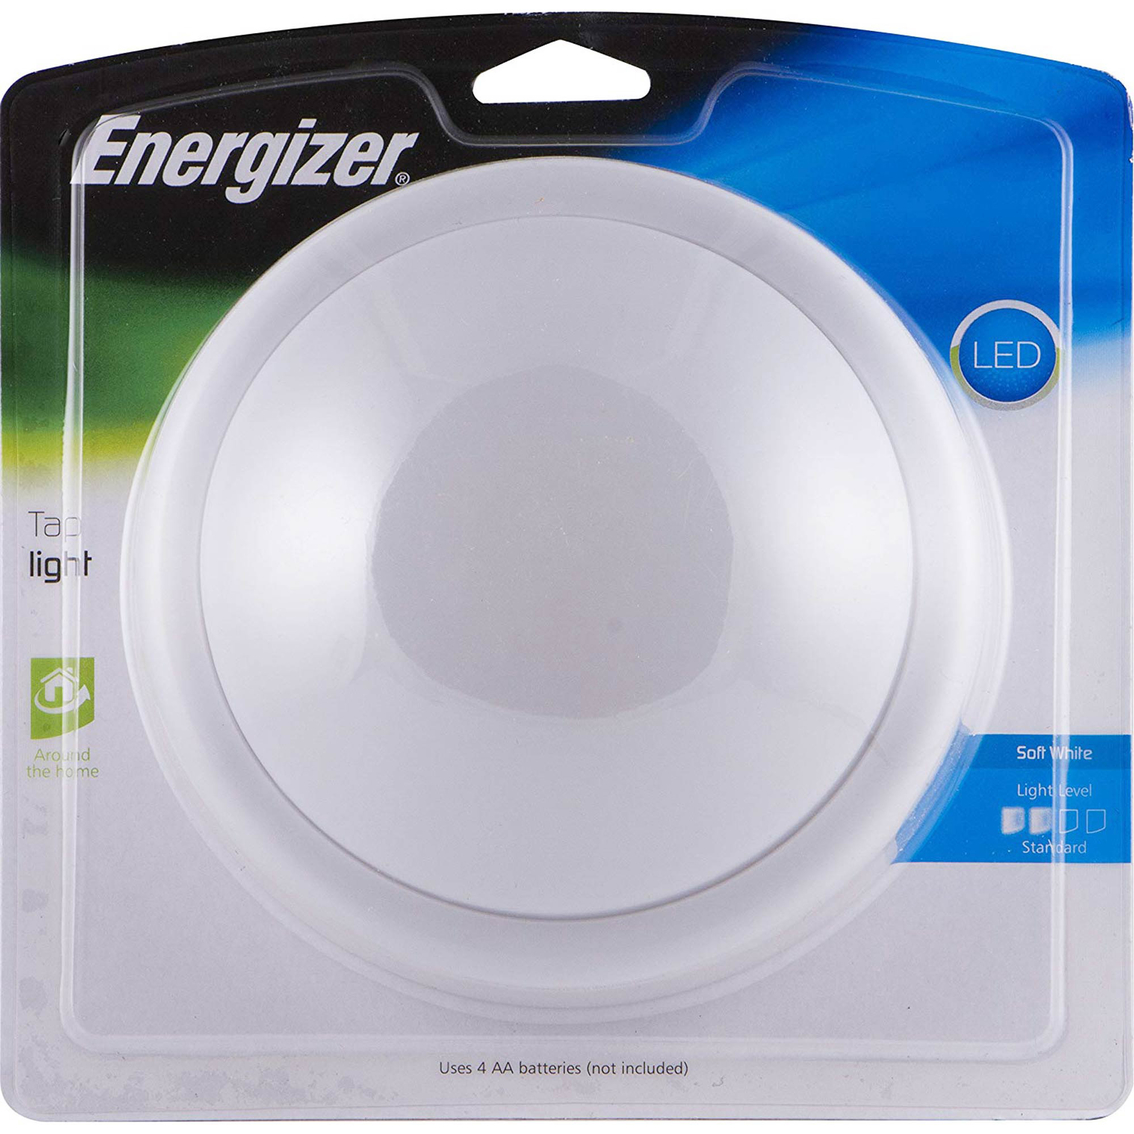 Energizer Battery Operated Tap Light 7.5 in. diam. - Image 5 of 6